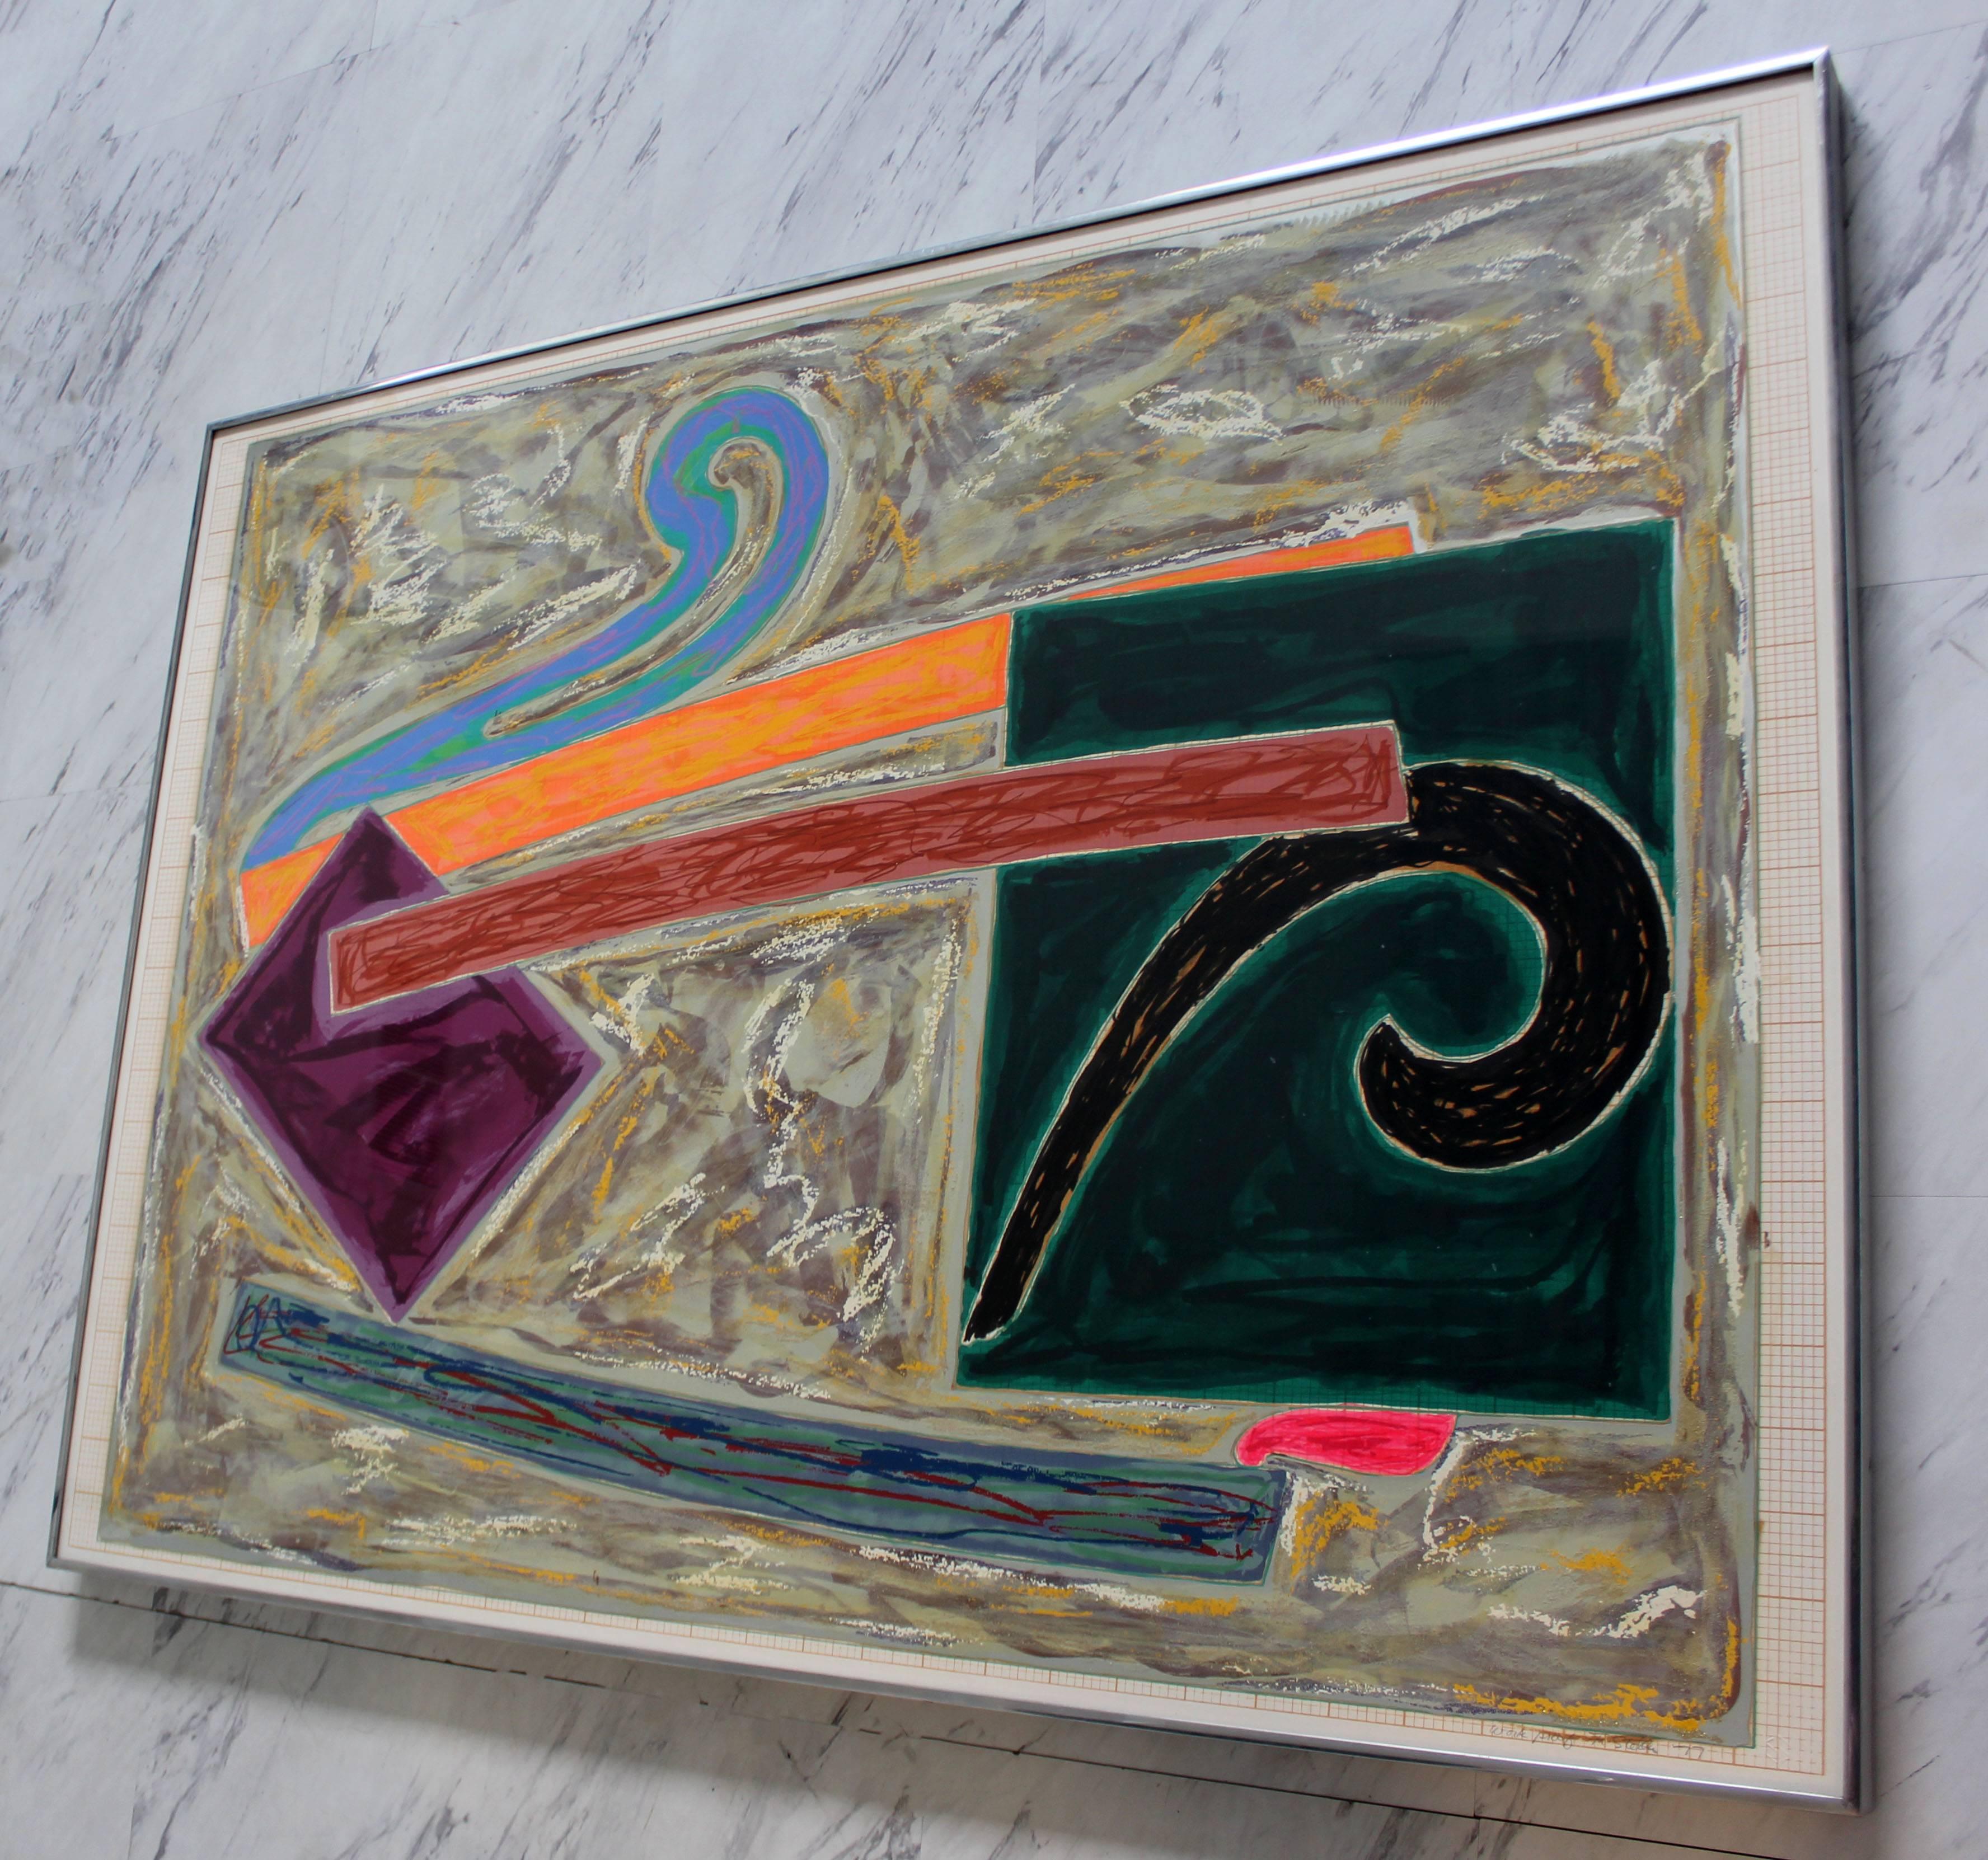 Mid-Century Modern Abstract Mixed-Media Signed and Dated by Frank Stella 1977 on Graph Paper